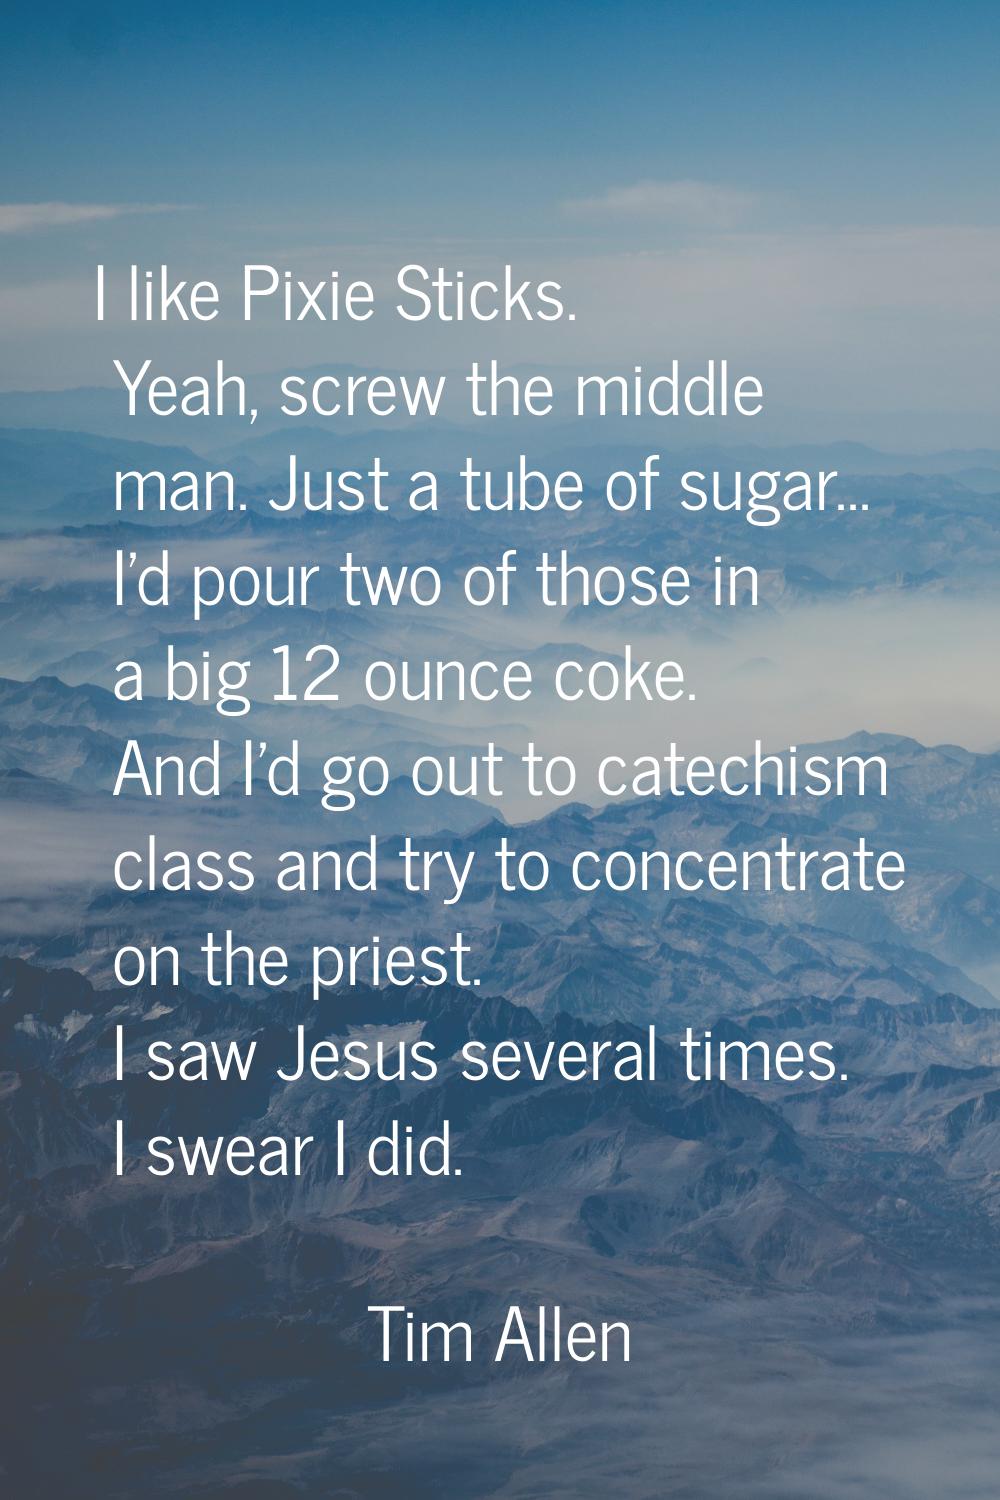 I like Pixie Sticks. Yeah, screw the middle man. Just a tube of sugar... I'd pour two of those in a